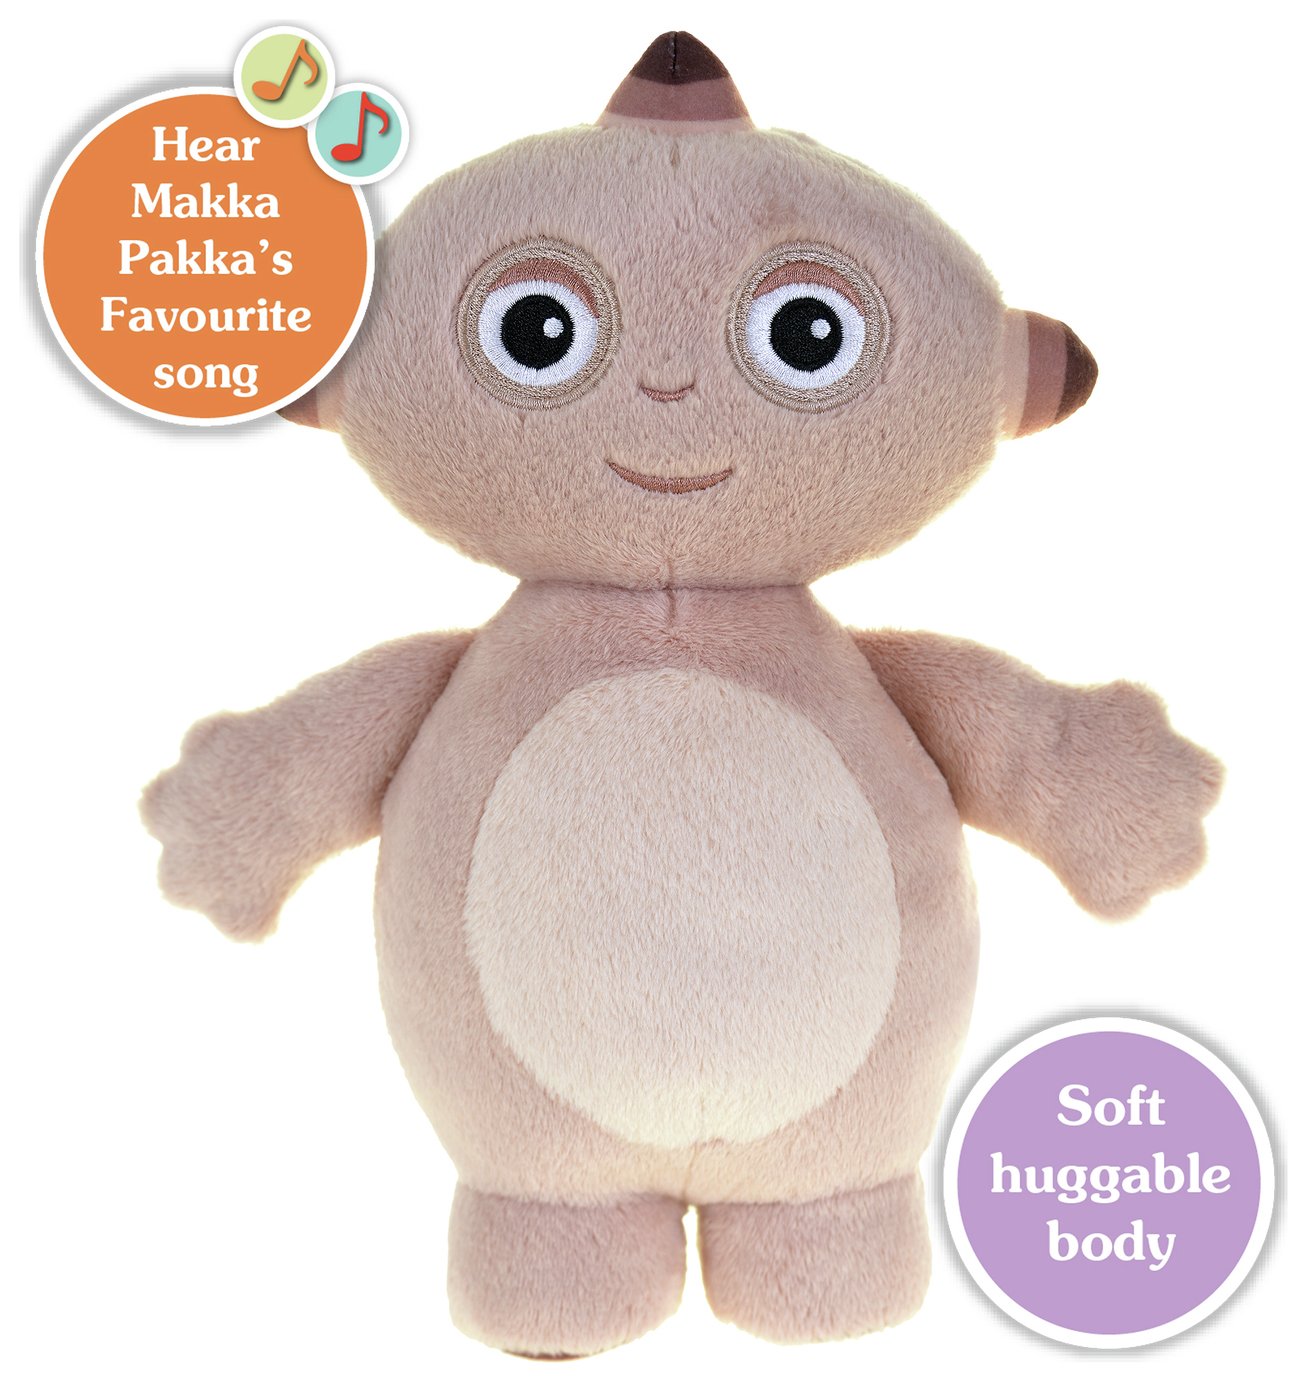 in the night garden bumper soft toy pack